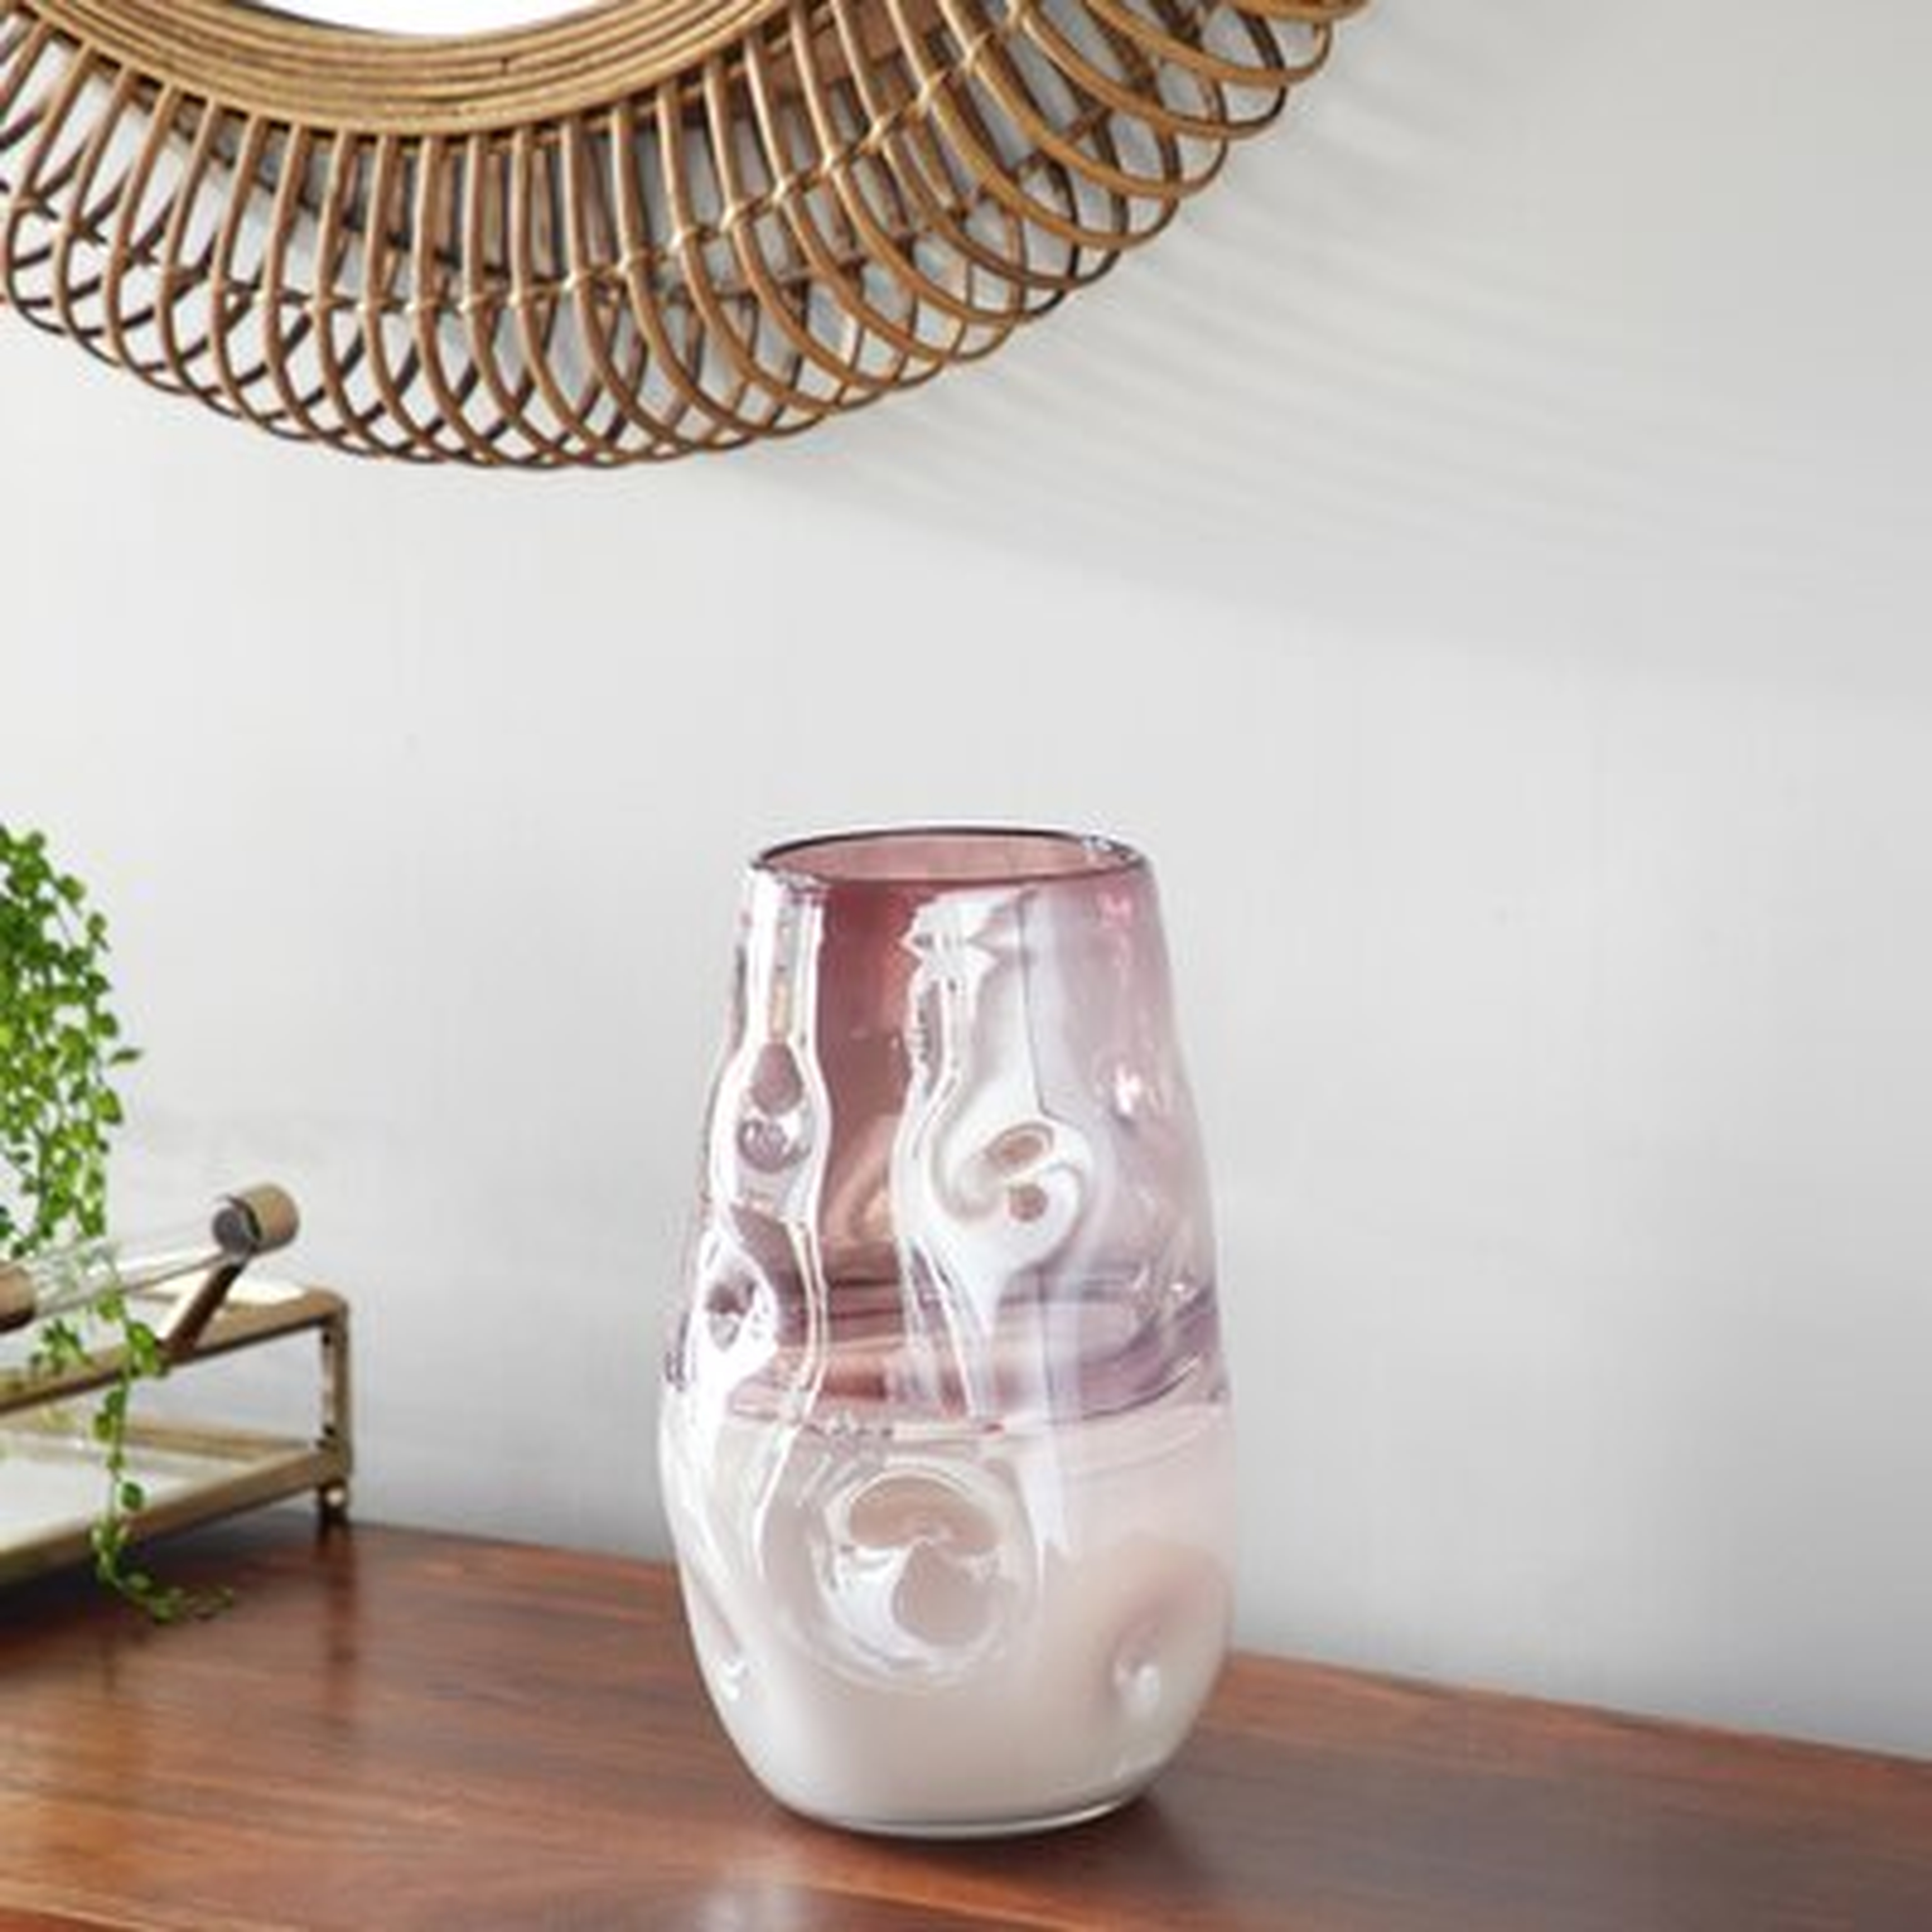 Small, Round Dimpled Translucent And Pastel Pink Vase, 6.25" X 11 - Wayfair